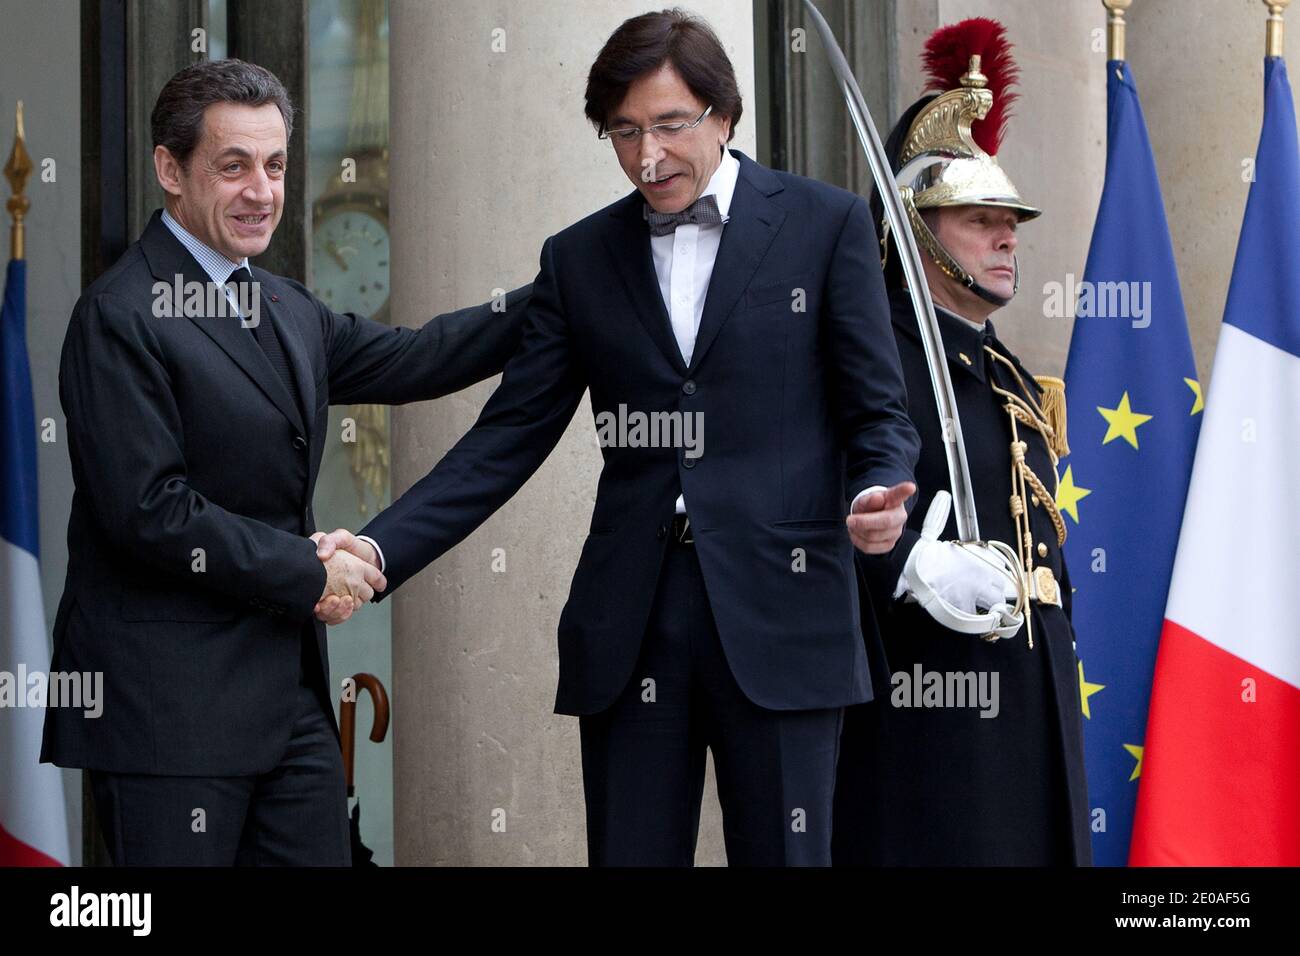 French President Nicolas Sarkozy shakes hands with Belgium Prime Minister Elio Di Rupo after a meeting at the Elysee Palace, in Paris, France on February 24, 2012. Photo by Stephane Lemouton/ABACAPRESS.COM. Stock Photo